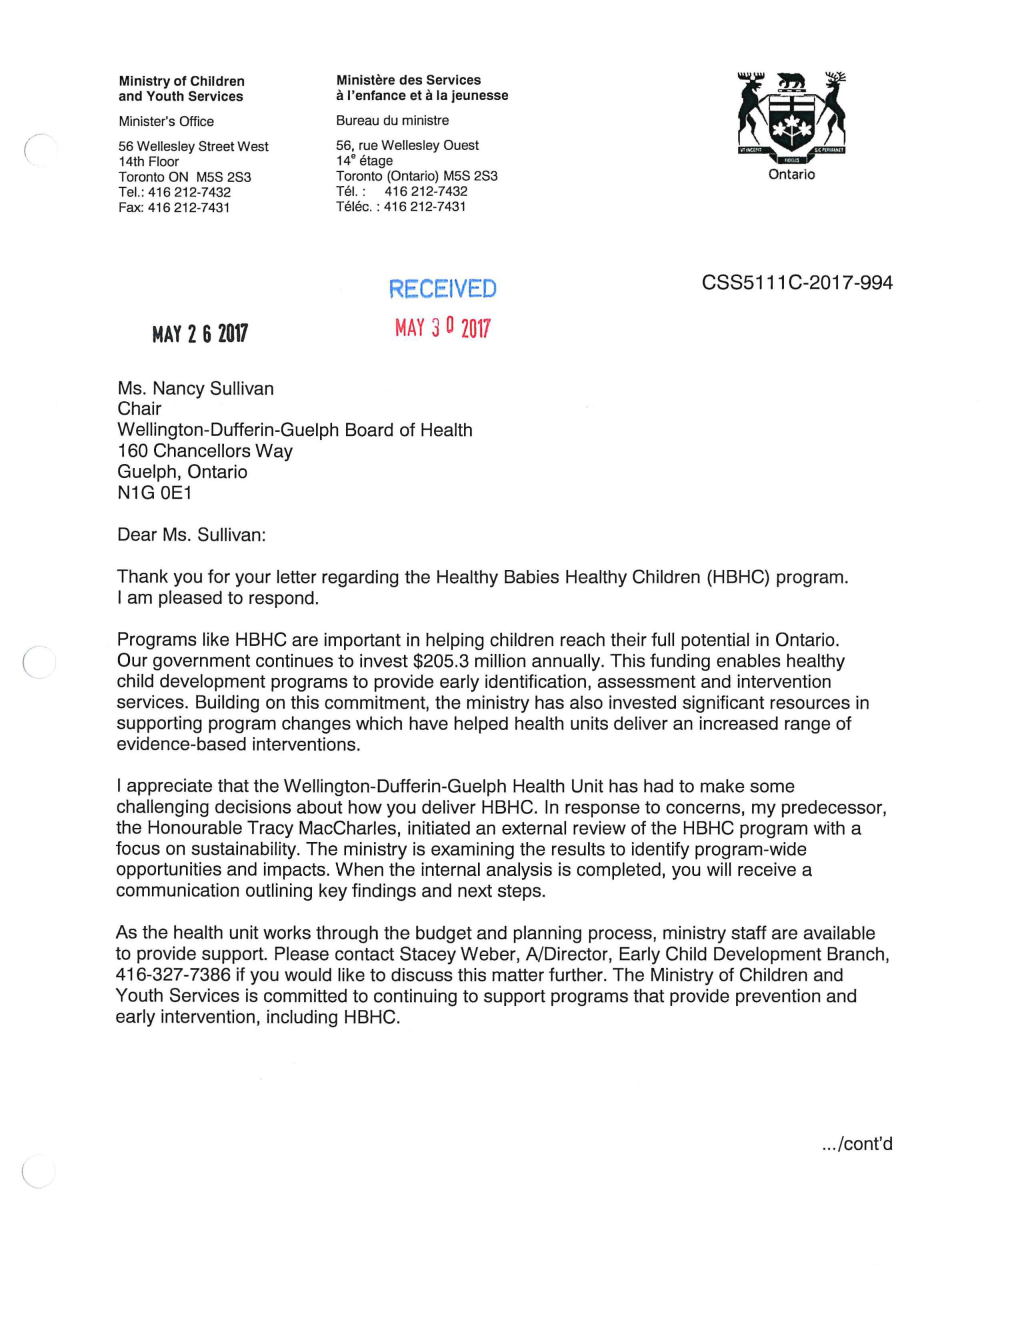 Michael Coteau, Minister, MCYS Response Letter to WDGPH Re